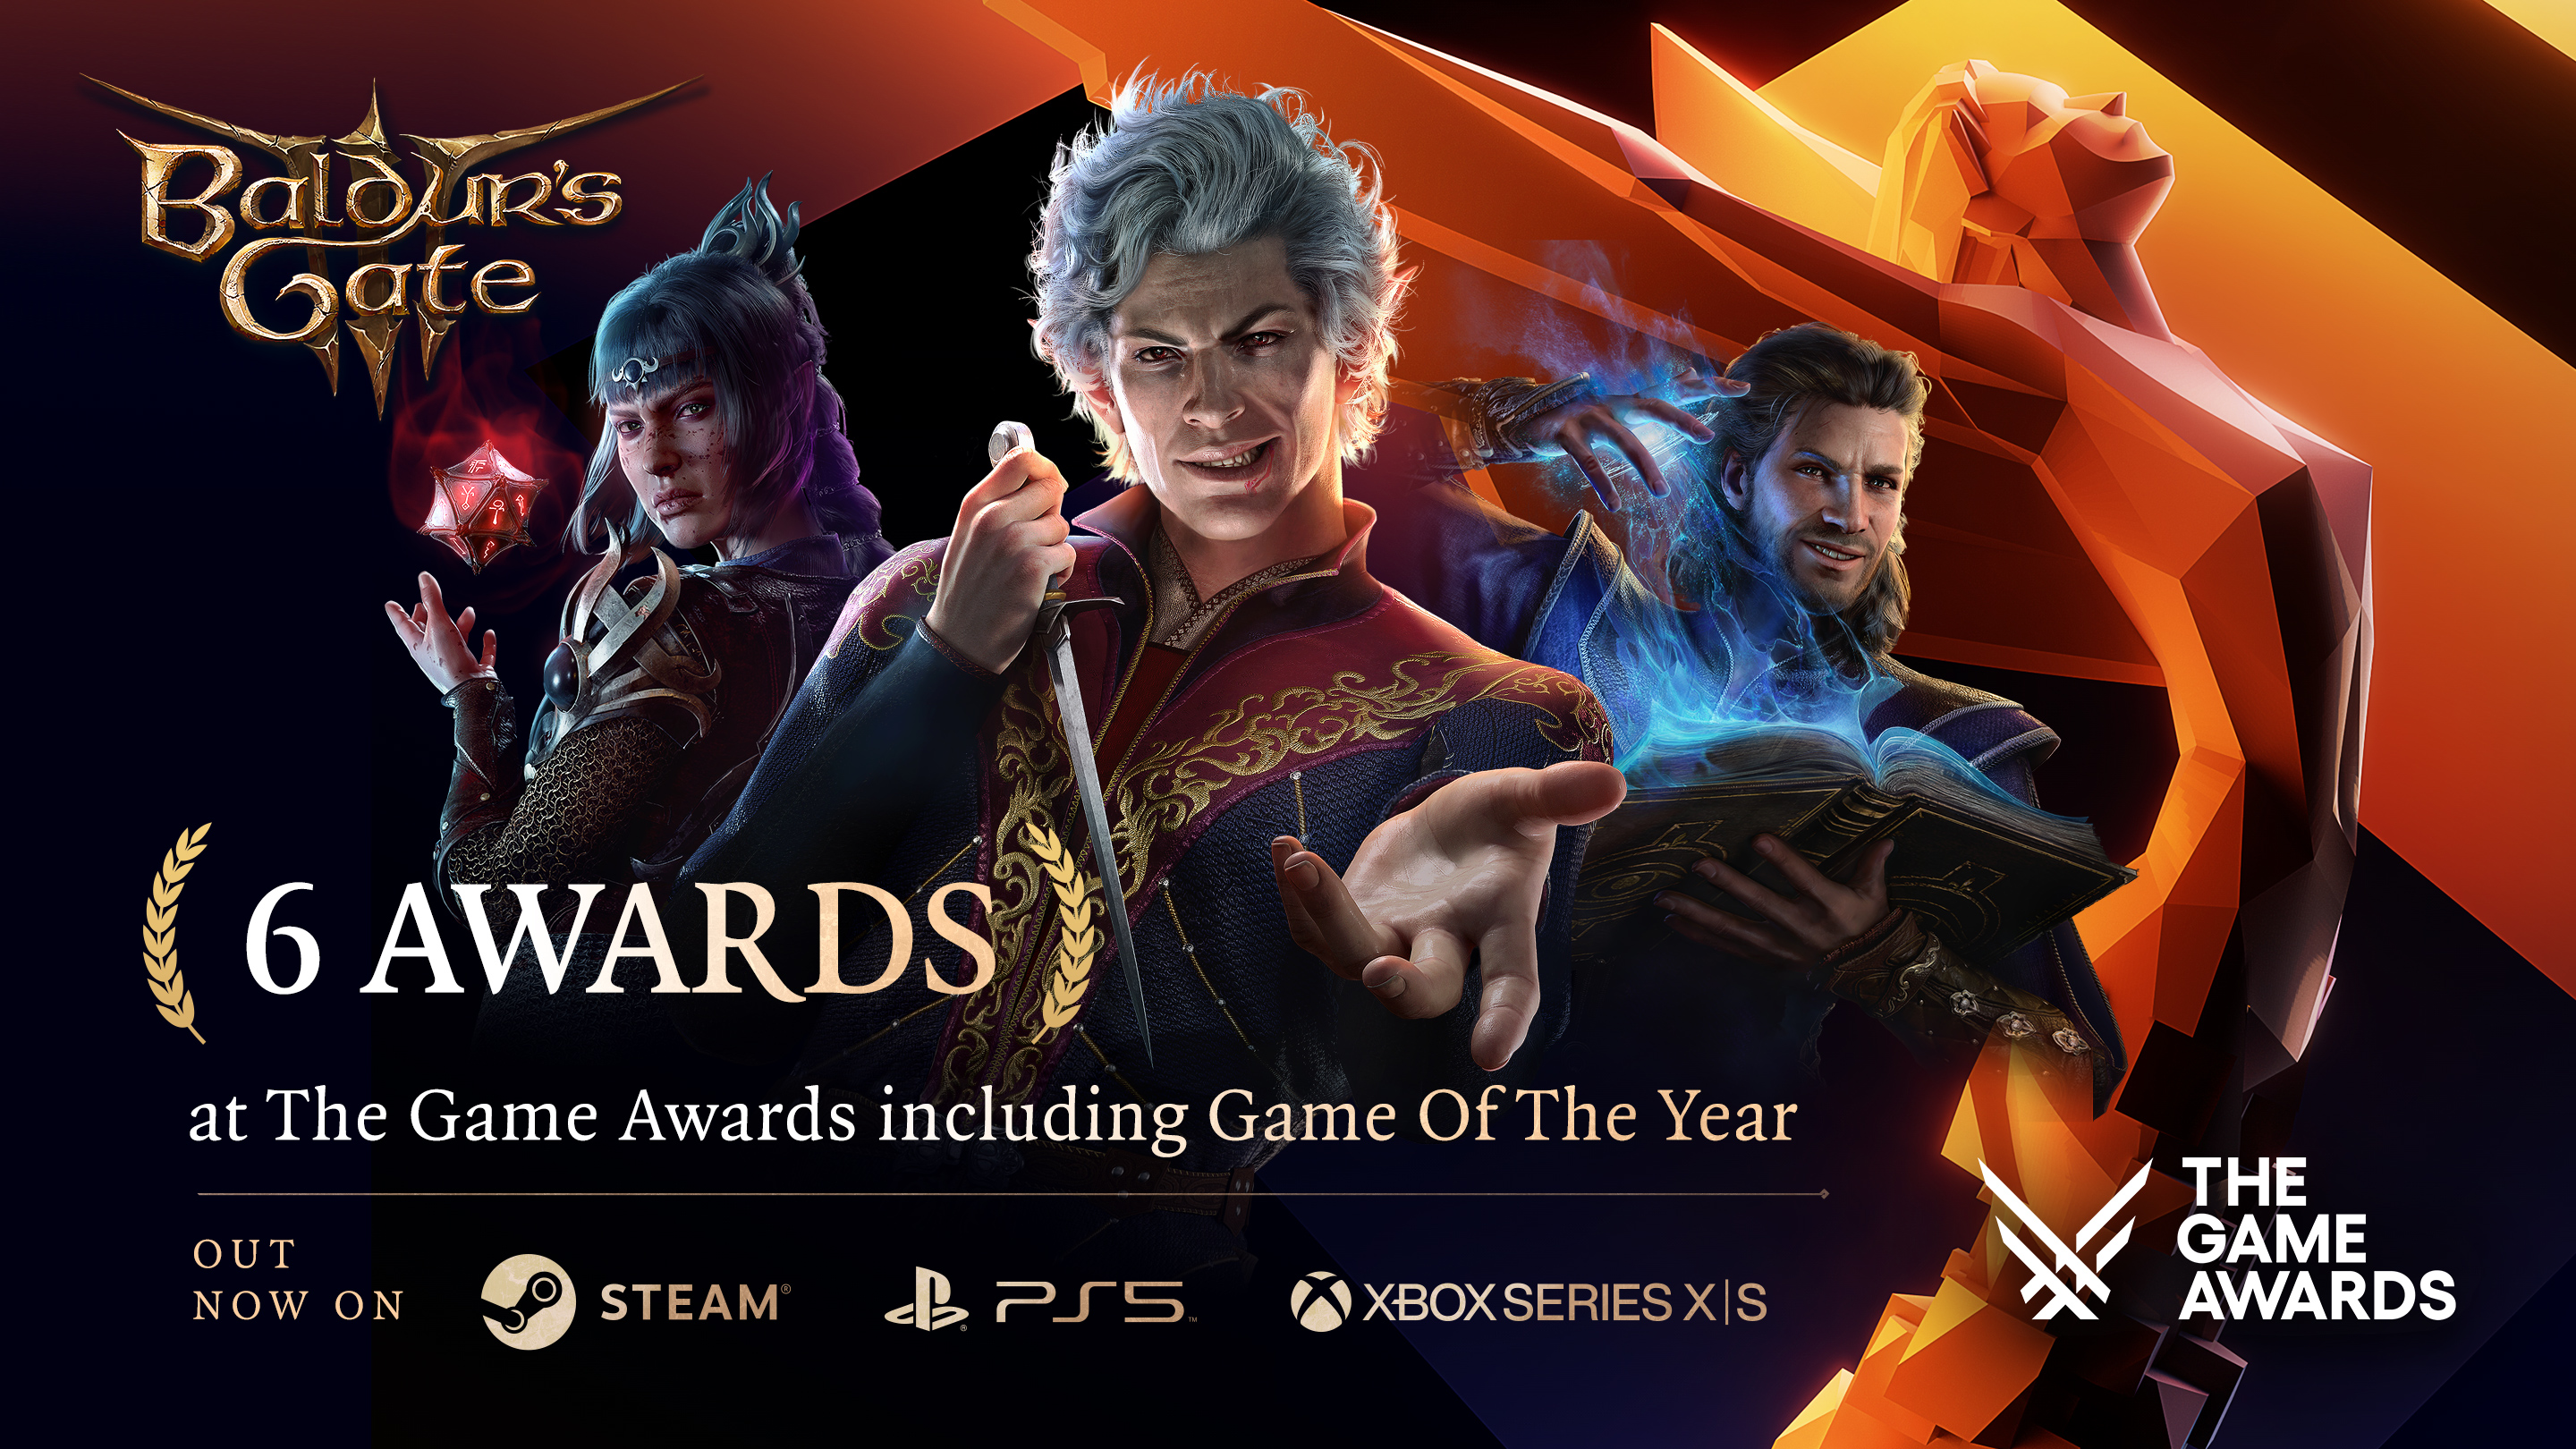 Baldur's Gate 3 on X: What a night. Thank you to everyone who voted in  #TheGameAwards. Baldur's Gate 3 is out now on PlayStation 5, PC, and Xbox  Series X